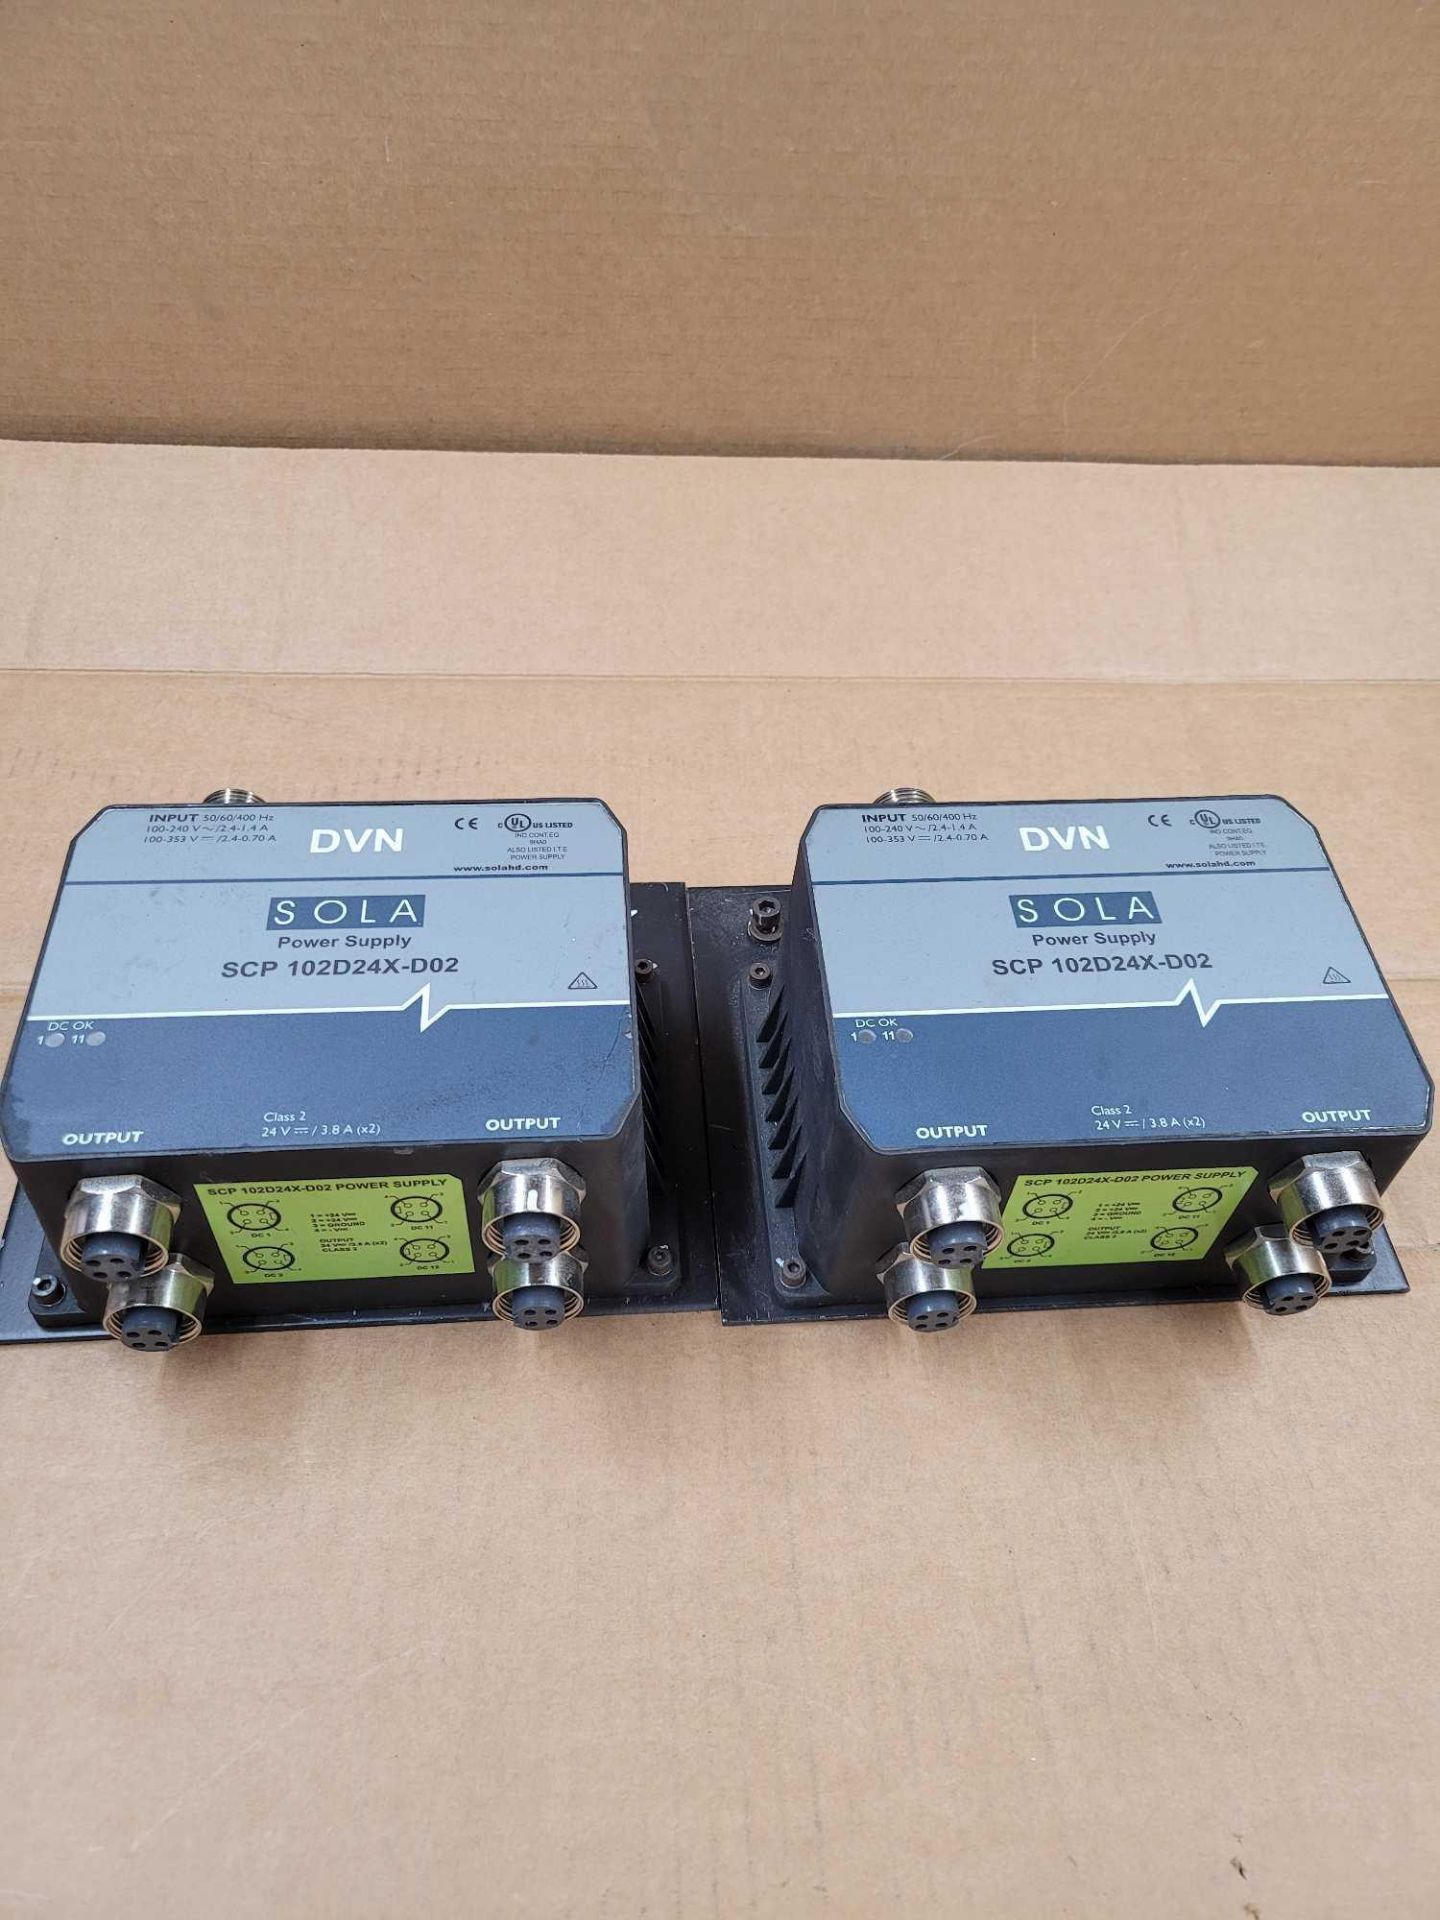 LOT OF 2 SOLA SCP 102D24X-D02 / Power Supply  /  Lot Weight: 12.4 lbs